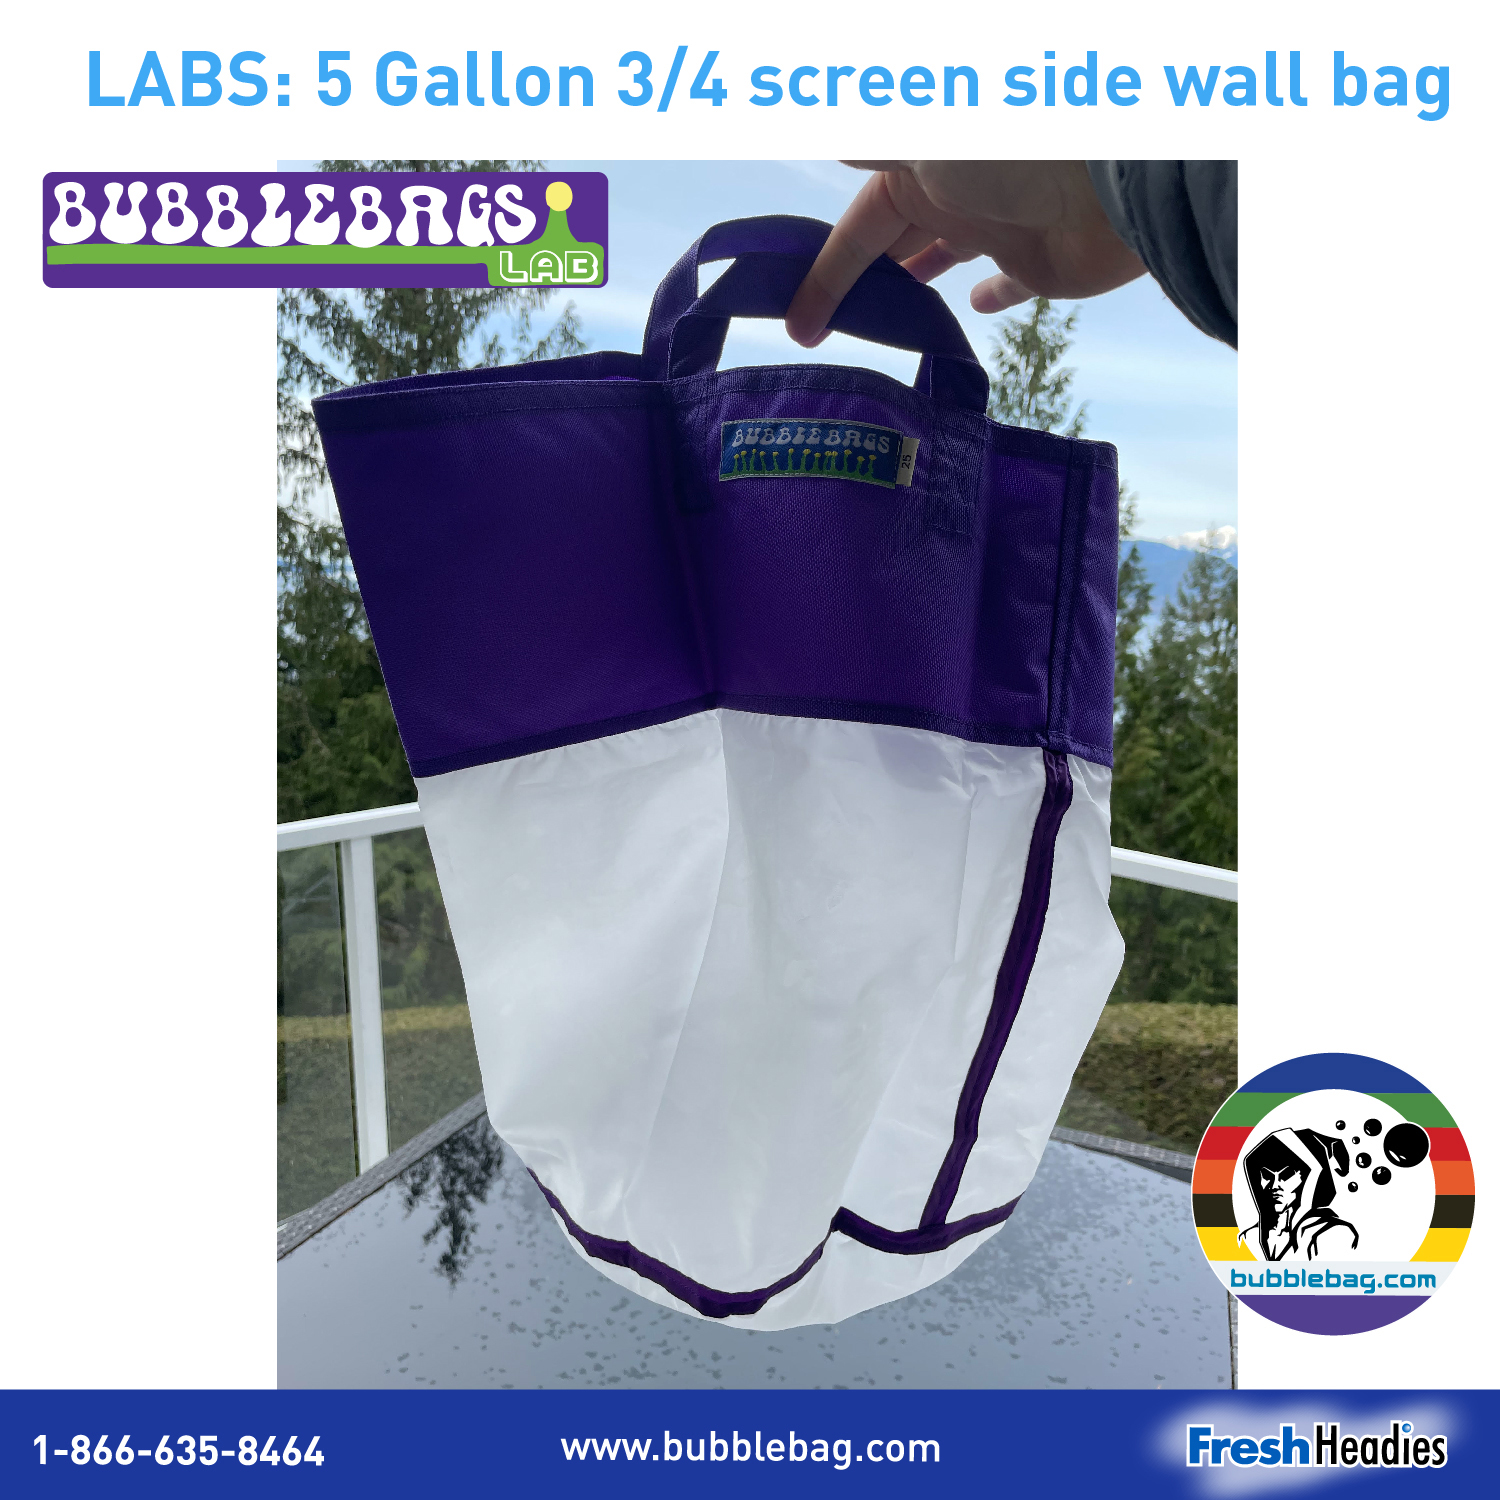  *1 Set in Stock Now!* 5 Gallon 'LABS' 8 Bag Set | Special Limited Edition (LBM8)